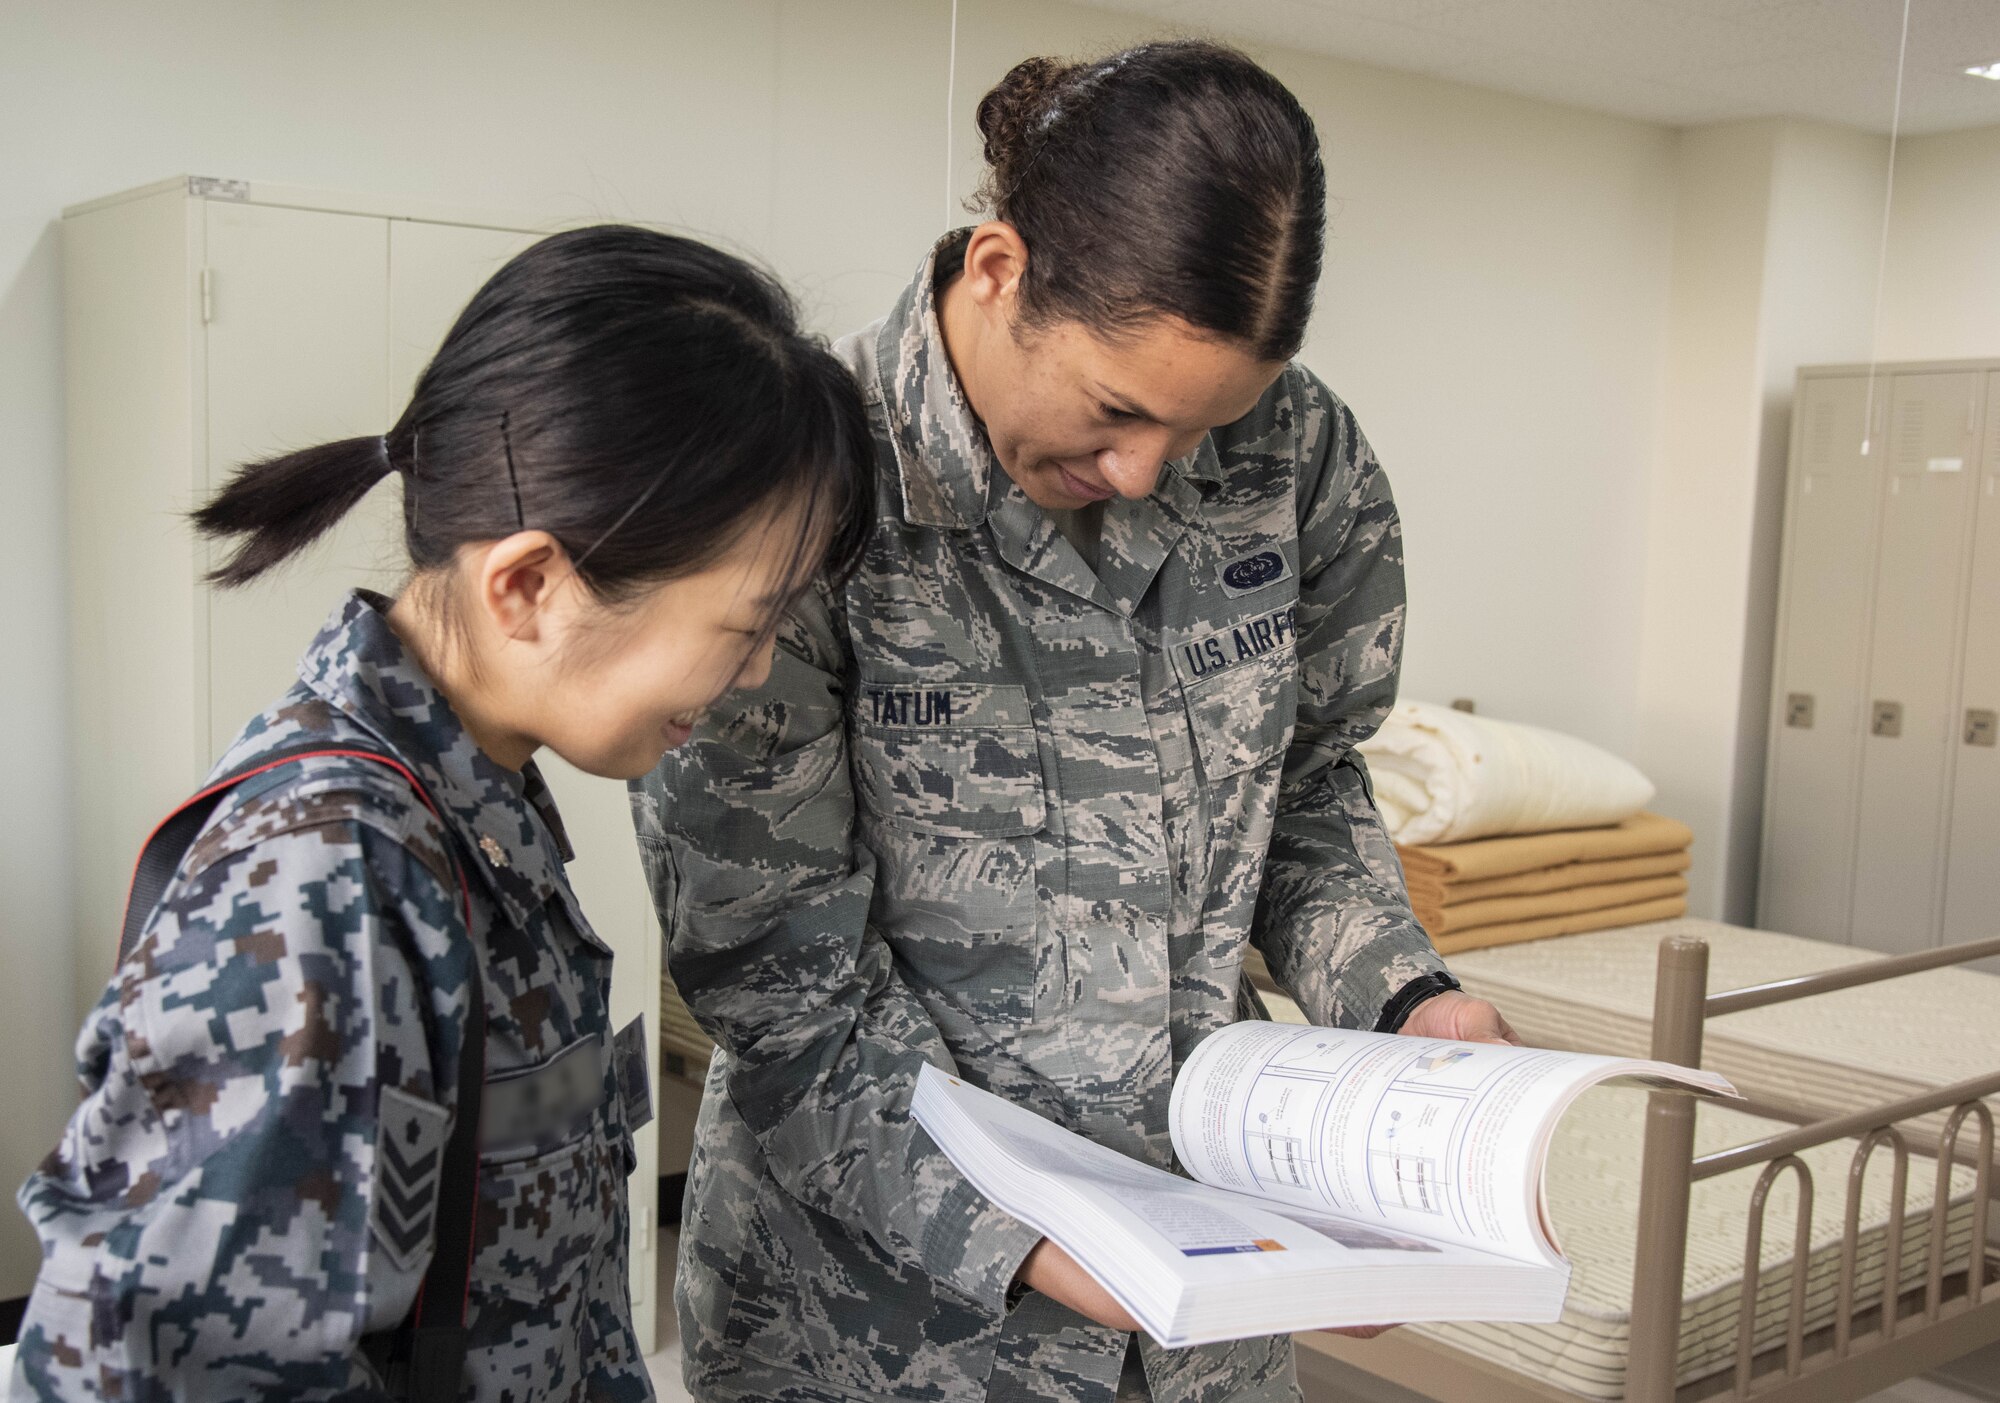 Japan Air Self-Defense Force Senior Airman Shimizu, left, a 37th Surveillance Squadron radar maintenance technician, looks at a Japanese phrase book with U.S. Air Force Airman 1st Class Hannah Tatum’s, a 35th Communications Squadron radio frequency transmission systems technician, during a bilateral exchange program at Yamada Sub Base, Yamada Town, Japan, Oct. 17, 2018. U.S. Air Force members from various career fields stayed with their JASDF counterparts to better integrate with each other. Participants obtained a deeper understanding of cultural differences among themselves and learned to perform tasks together, ensuring fluid mission execution in the future. (U.S. Air Force photo by Senior Airman Sadie Colbert)